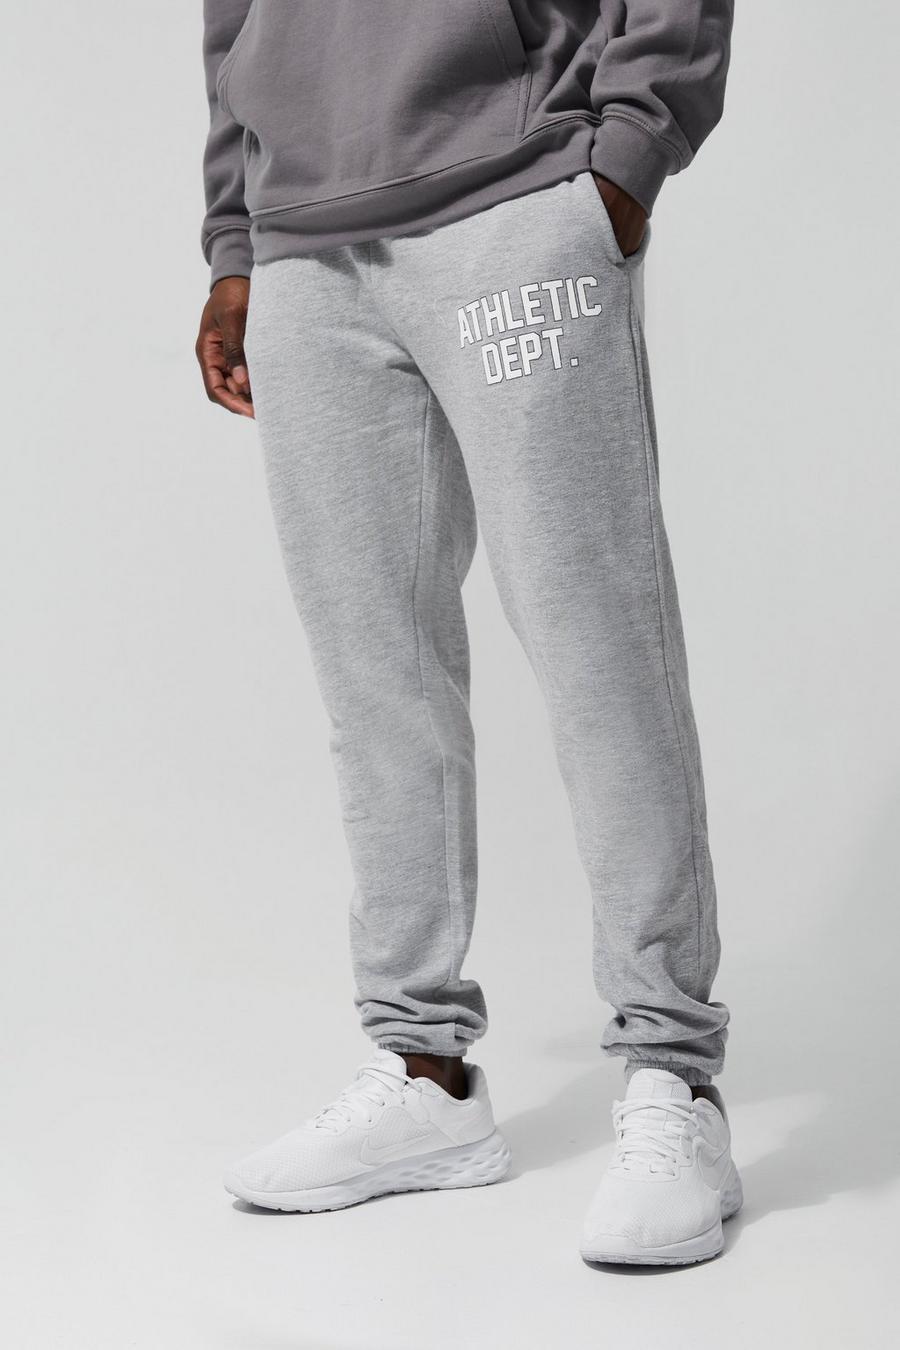 Grey gris Tall Man Active Athletic Dept. Joggers